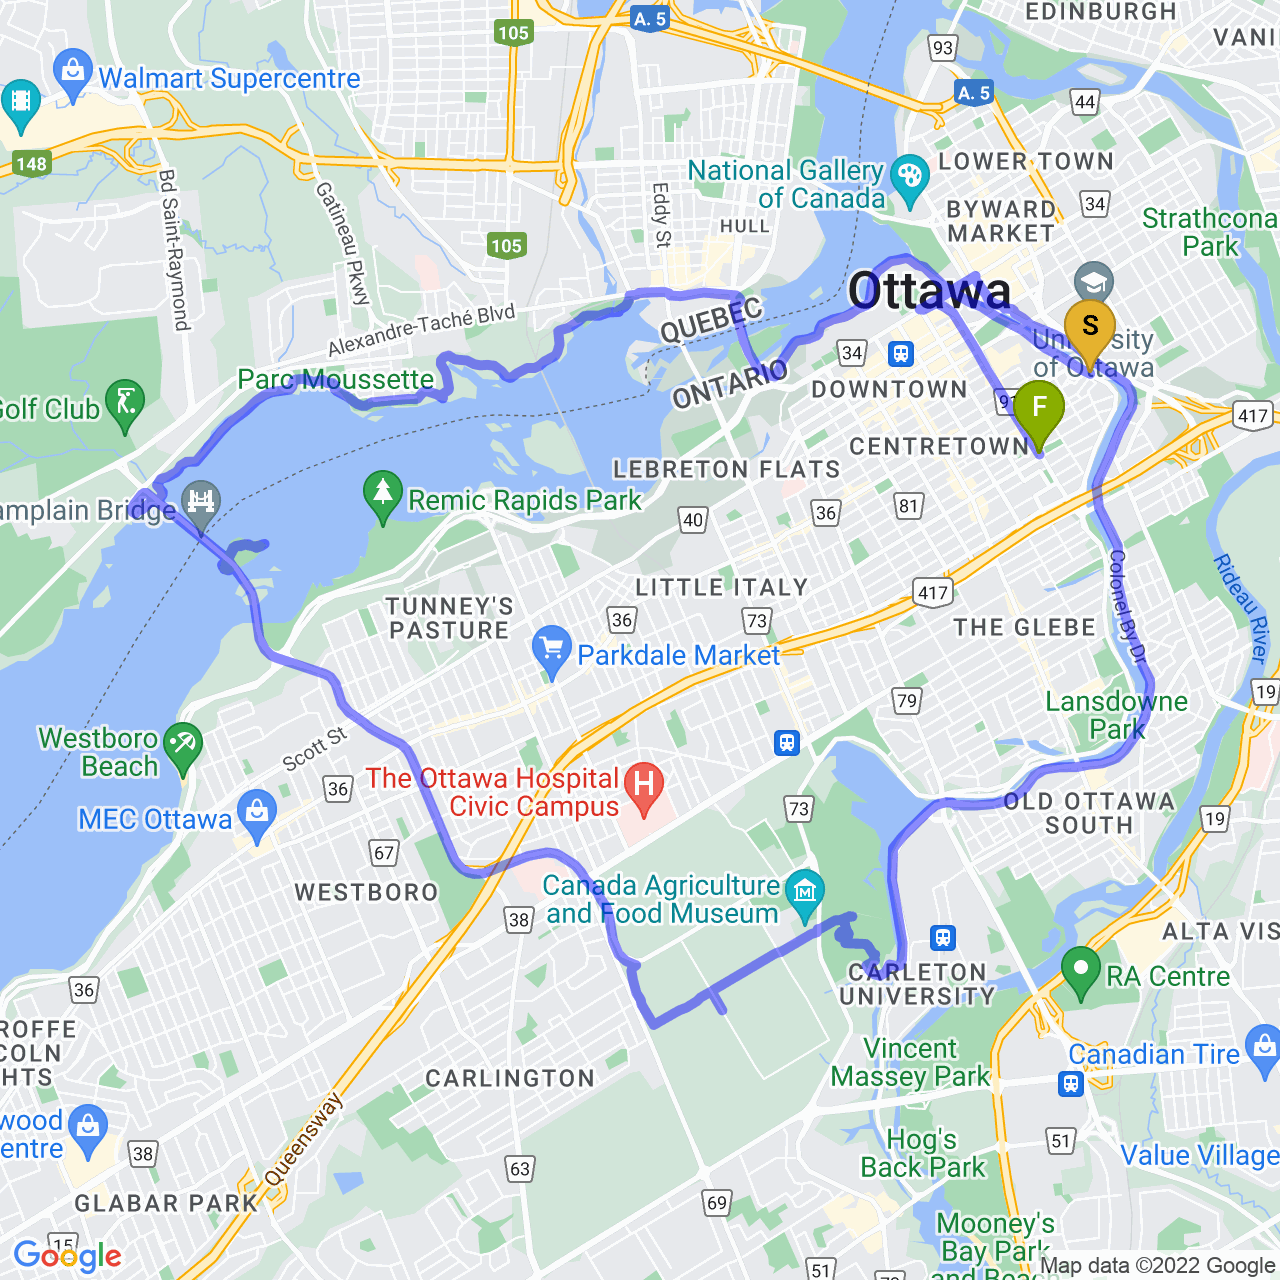 map of perfect summer night ride